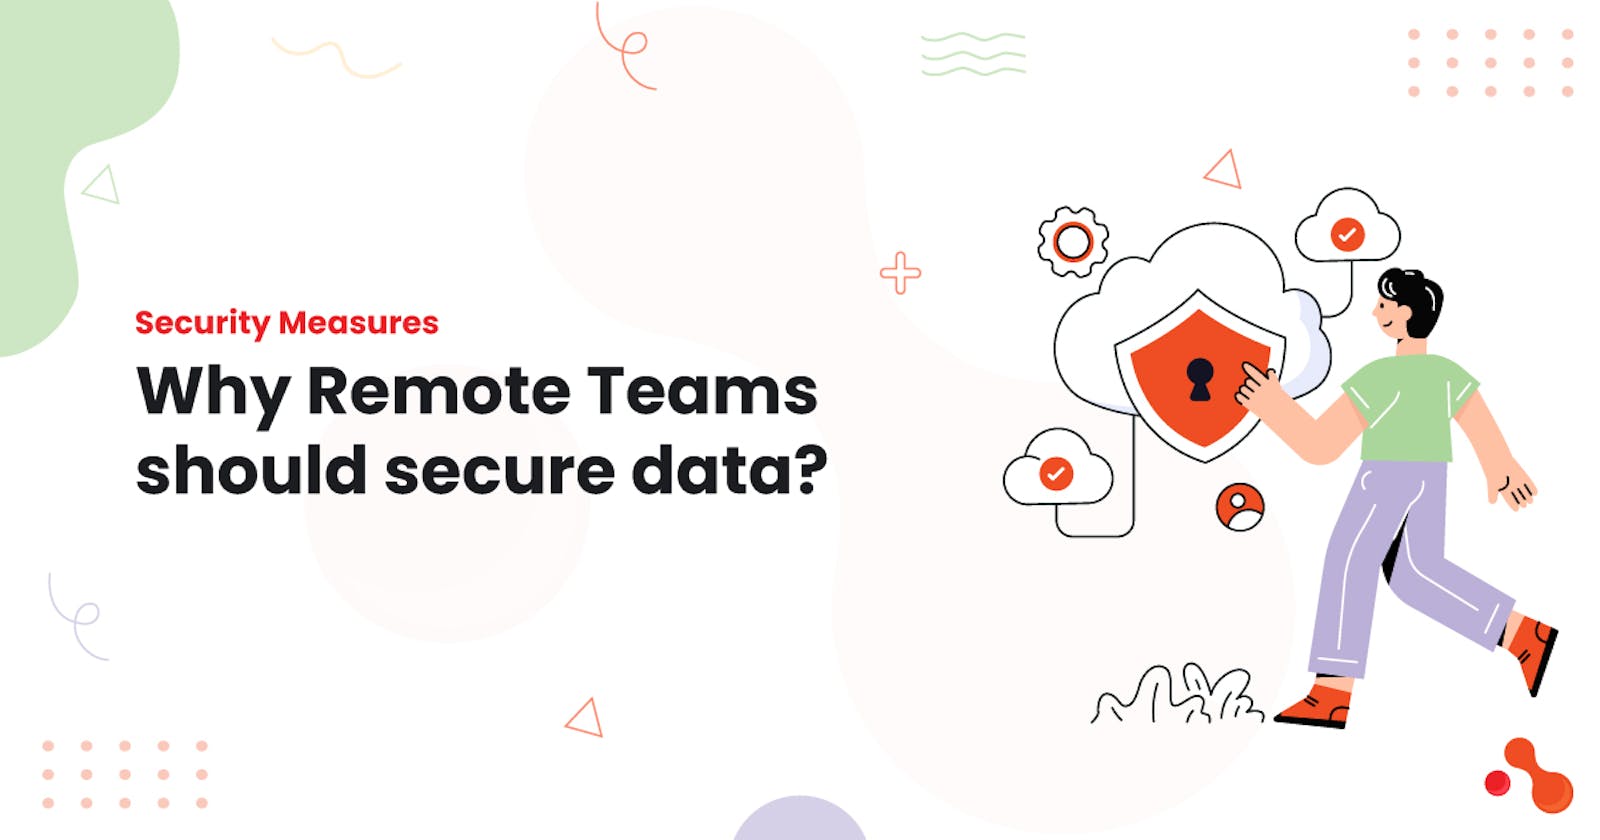 Security Measures: Why Remote Teams should secure data?